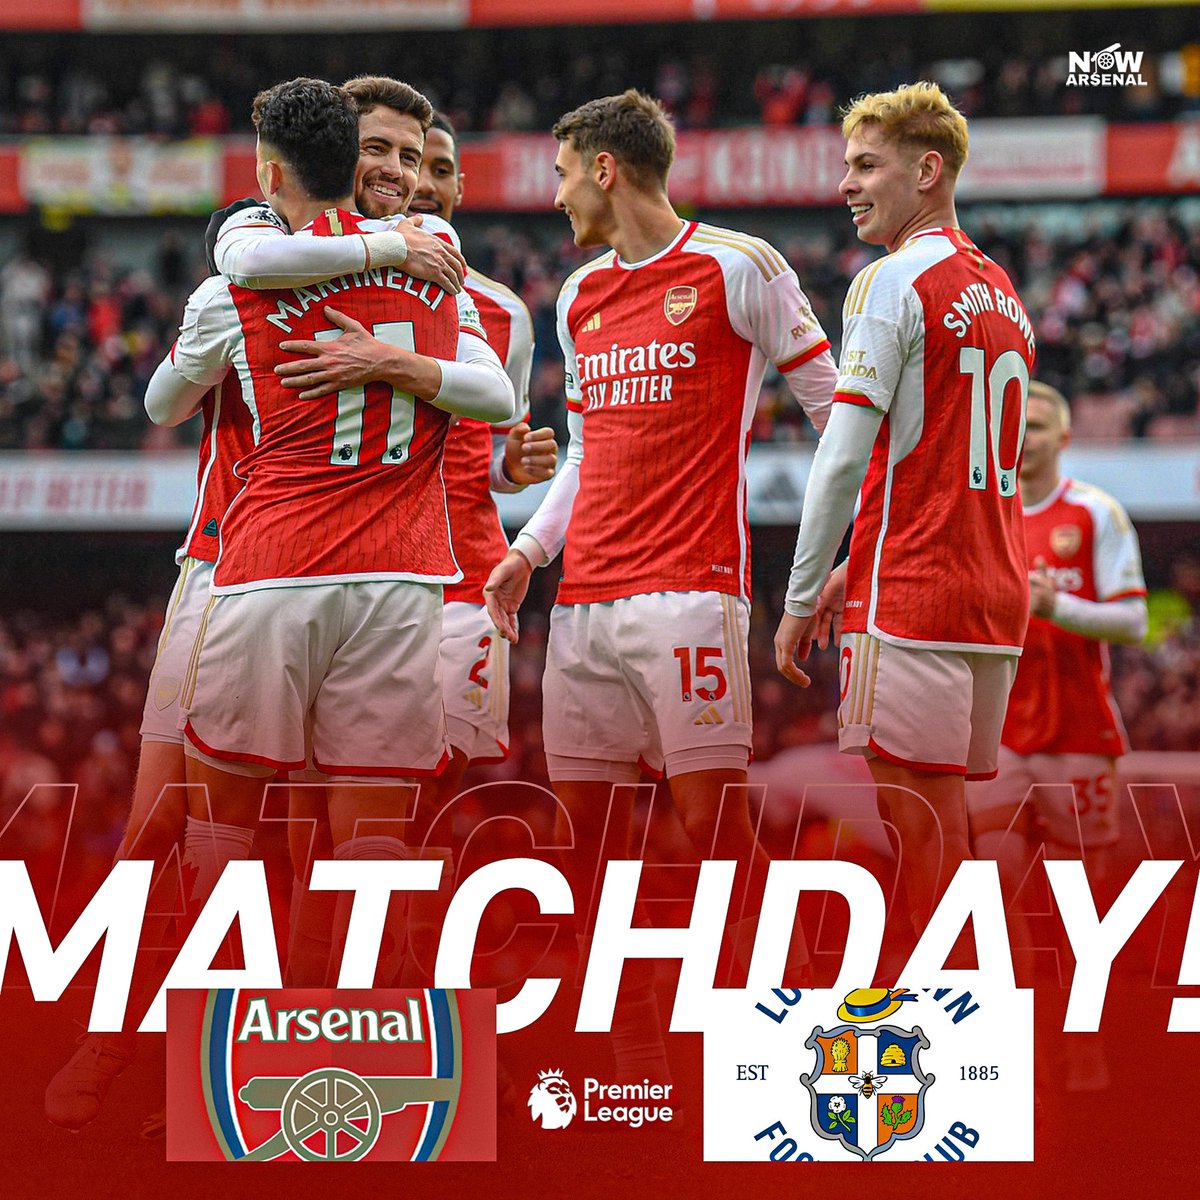 It's MatchdayLive.. Arsenal are looking to make it TEN Premier League games unbeaten tonight as they take on Luton Town at Emirates 🏟.. 
Must win game and another chance to increase the goal difference. The title run in is here and there’s no room for slip-ups now.
🔴 COYG!⚪️